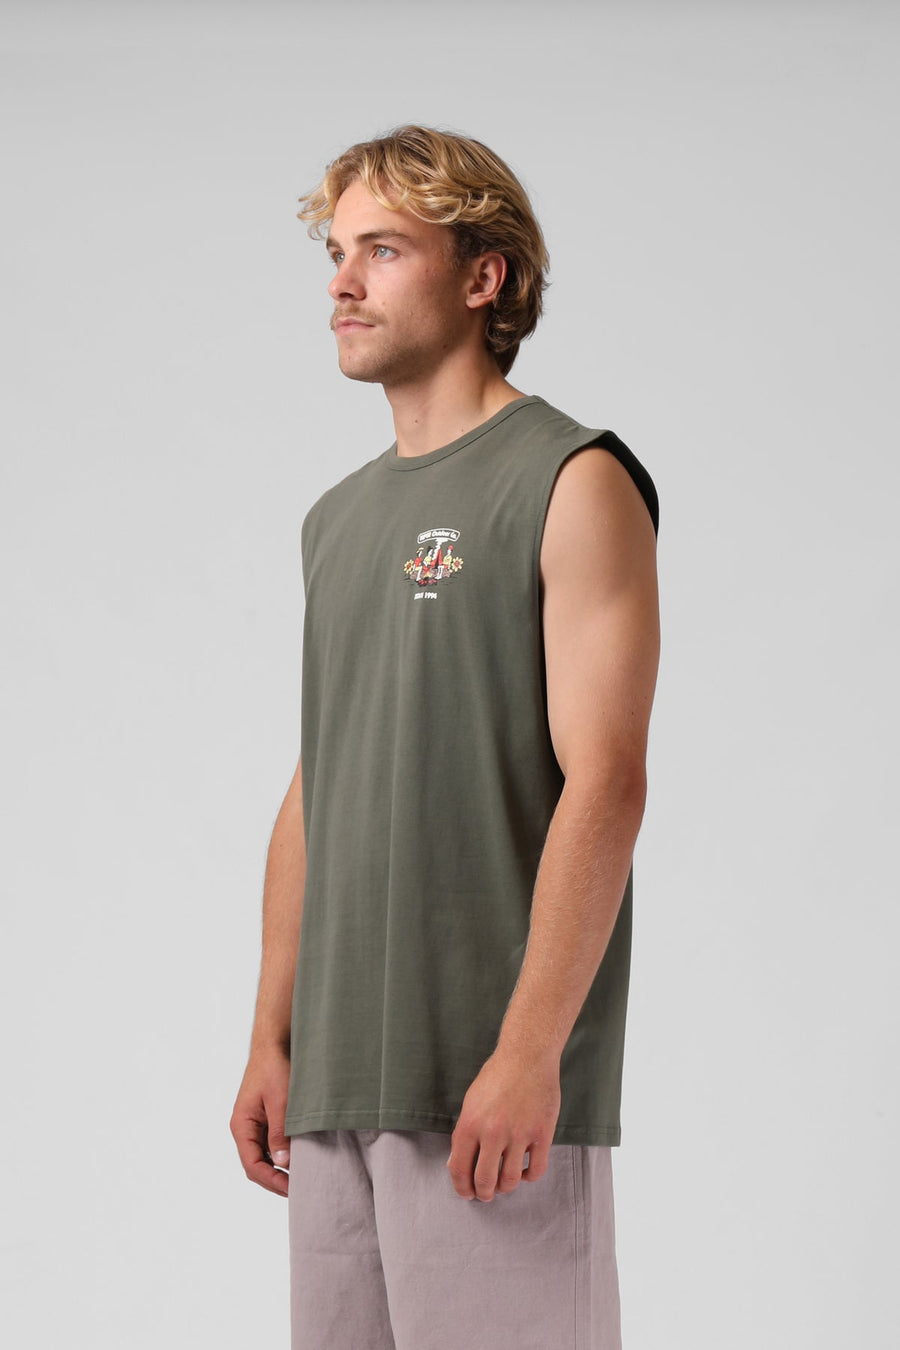 RPM OUTDOOR CO MUSCLE TEE - DARK OLIVE - WILD ROSE